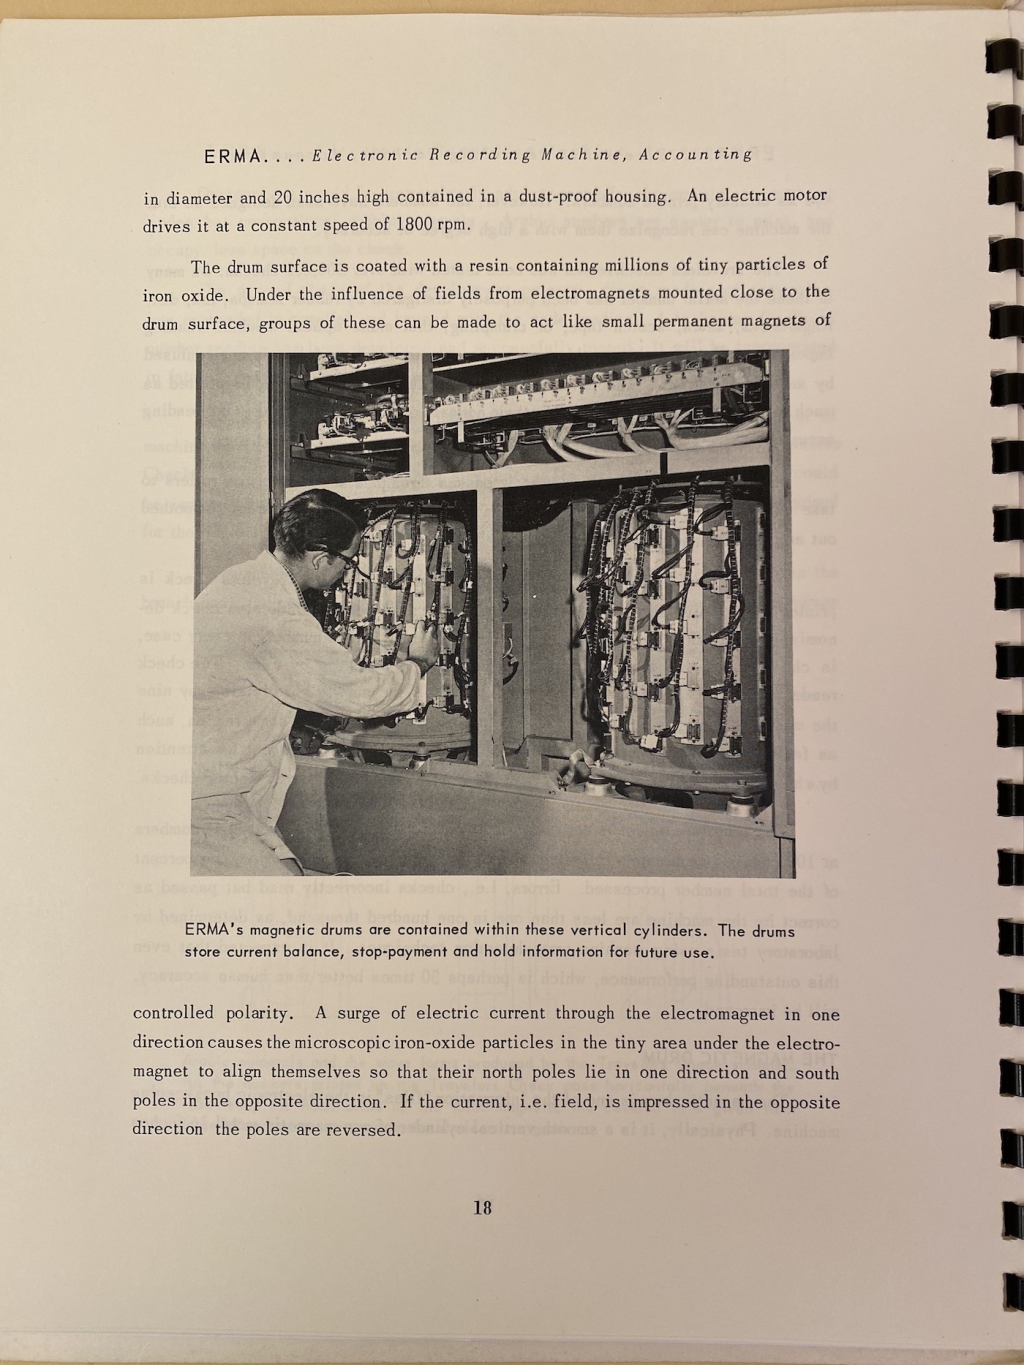 Page of the Bank of America brochure describing and illustrating the magnetic drum memories used by the system. Until the wide-spread adoption of solid-state memories, the electronic memory systems remained a significant stumbling block in building large scale systems.